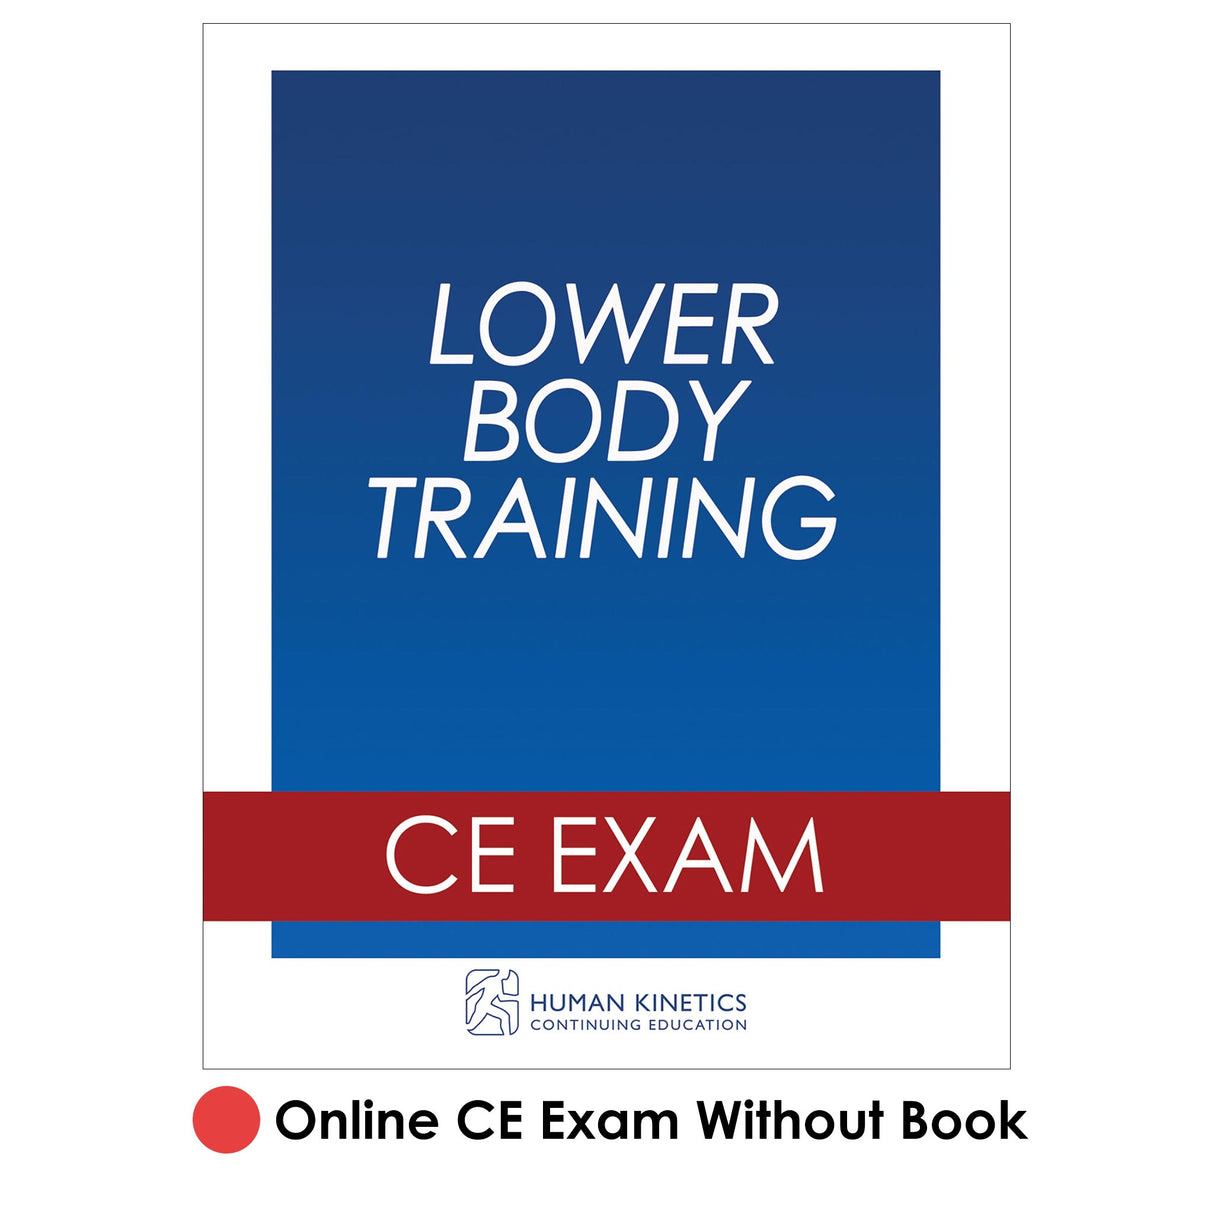 Lower Body Training Online CE Exam Without Book